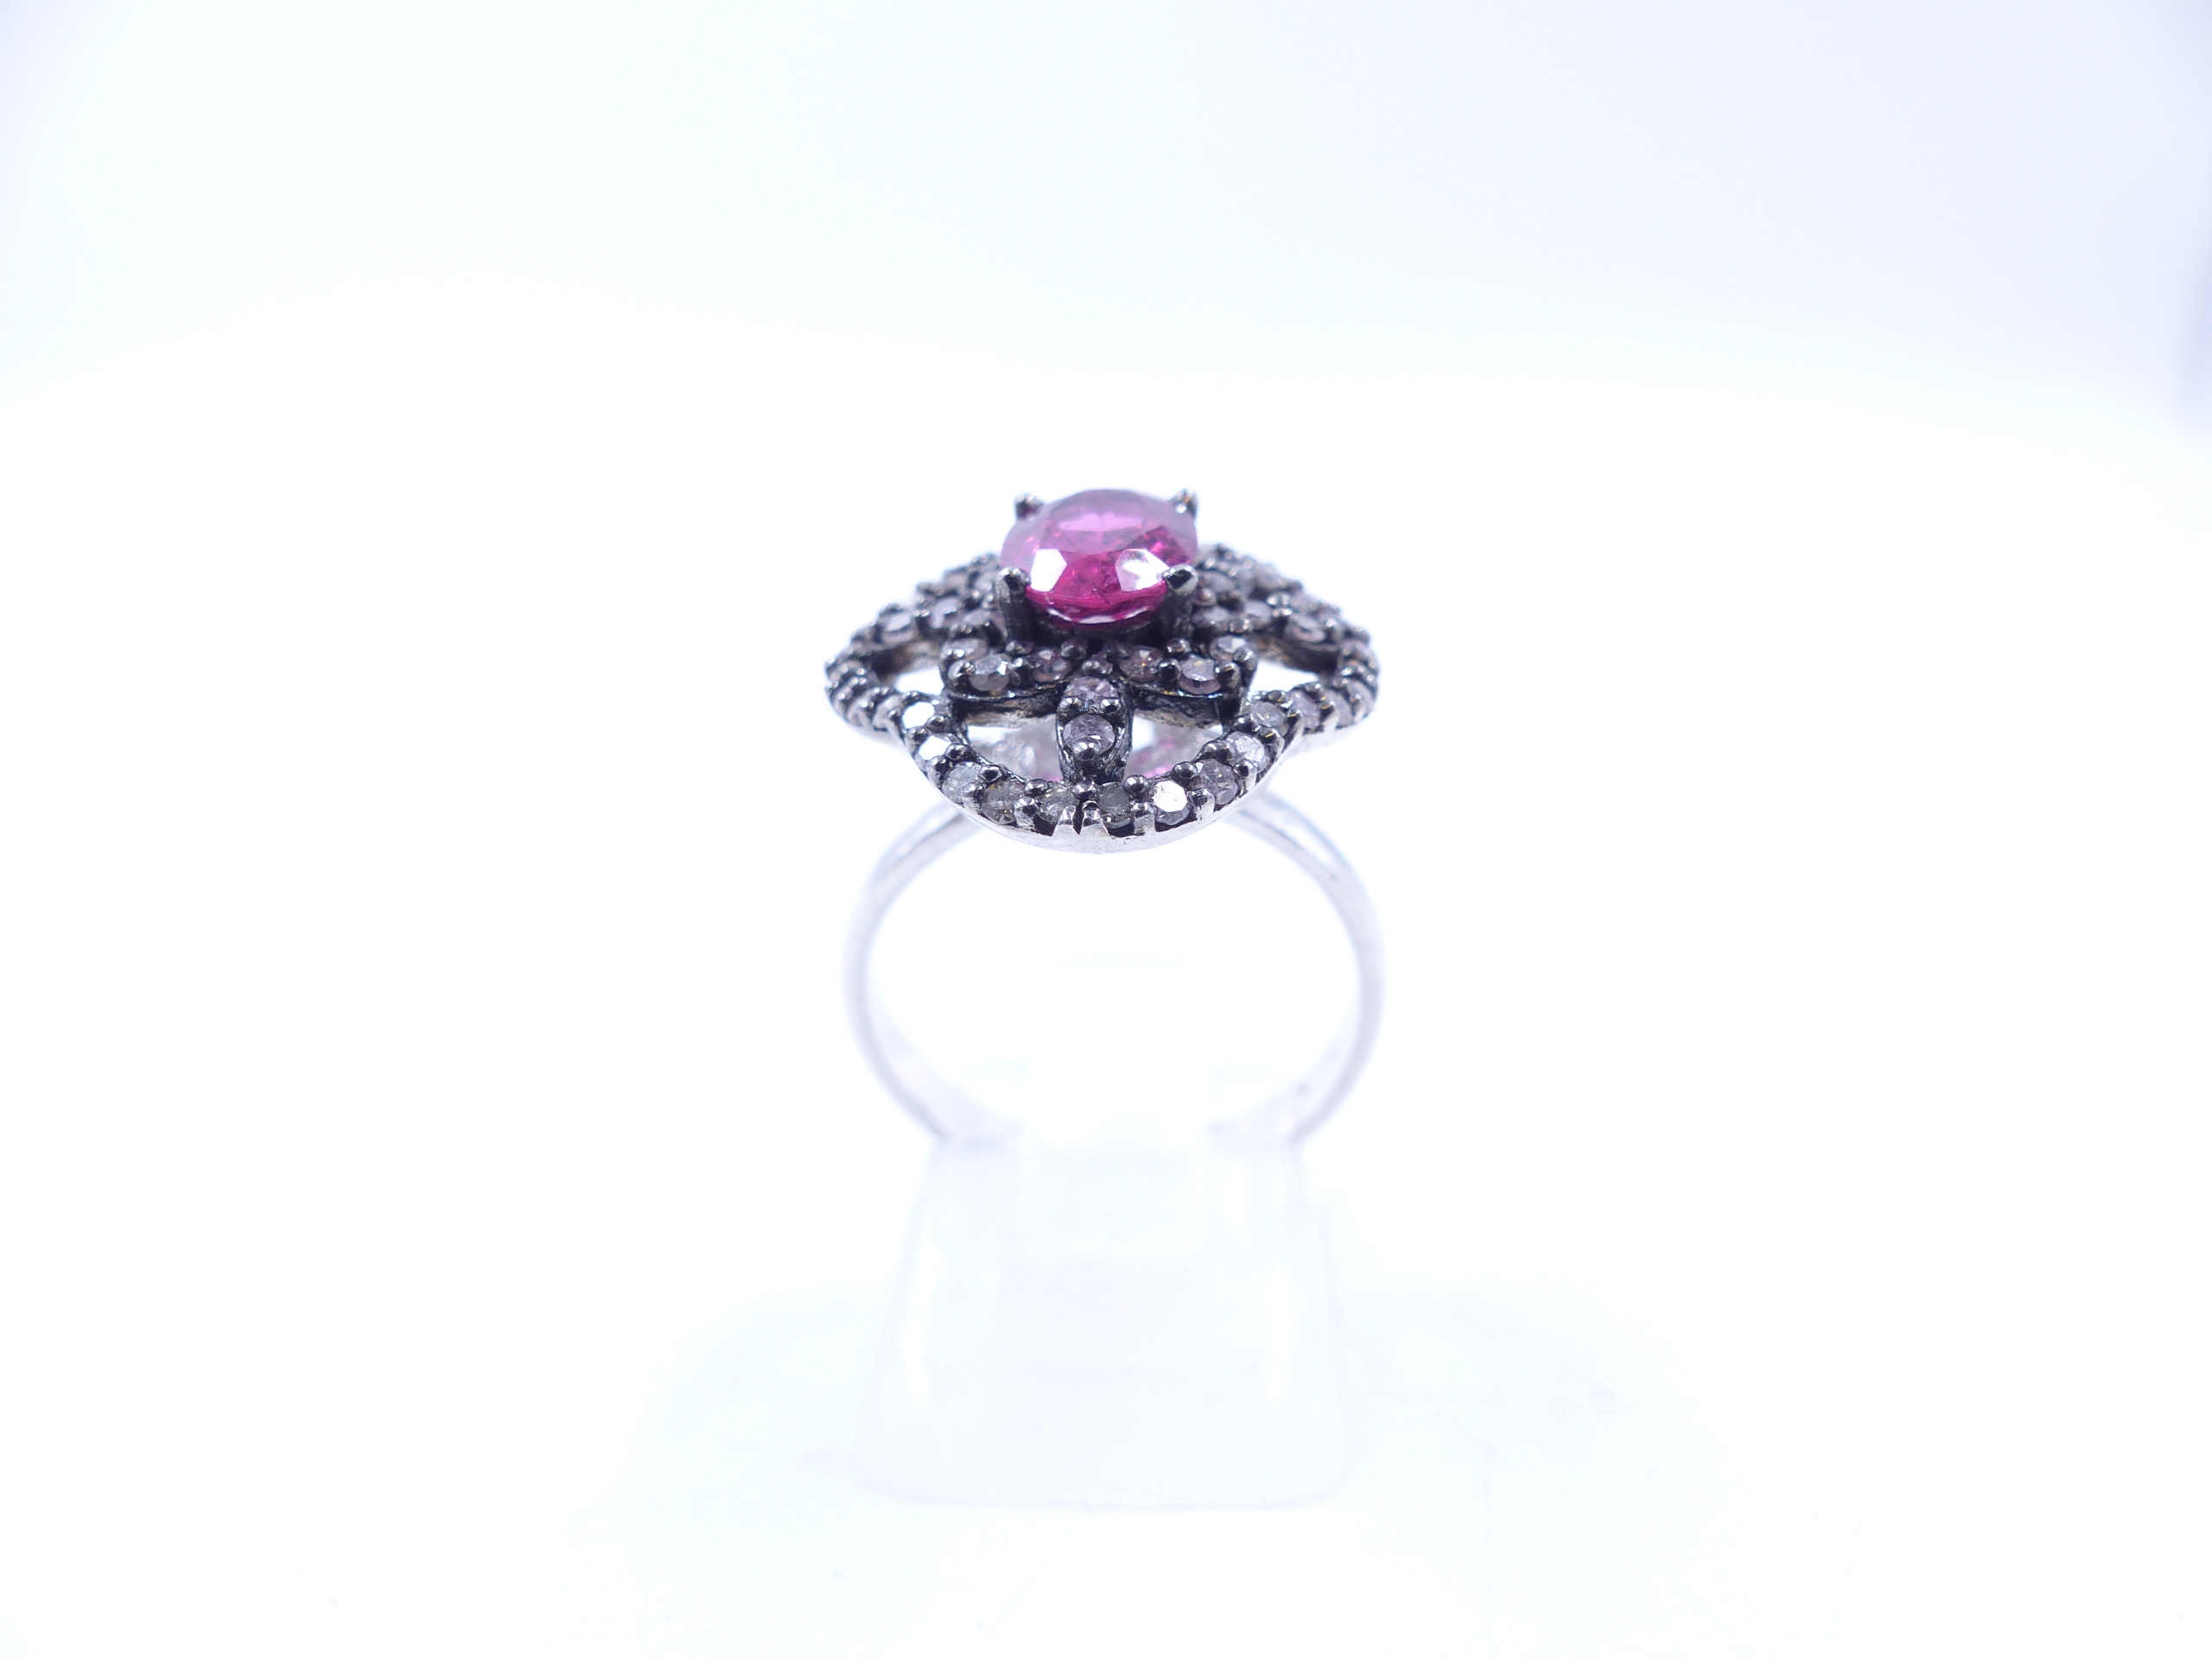 A PINK TOURMALINE AND DIAMOND OPEN WORK FILIGREE RING SET IN A WHITE METAL MOUNT,THE CENTRAL PINK - Image 15 of 17